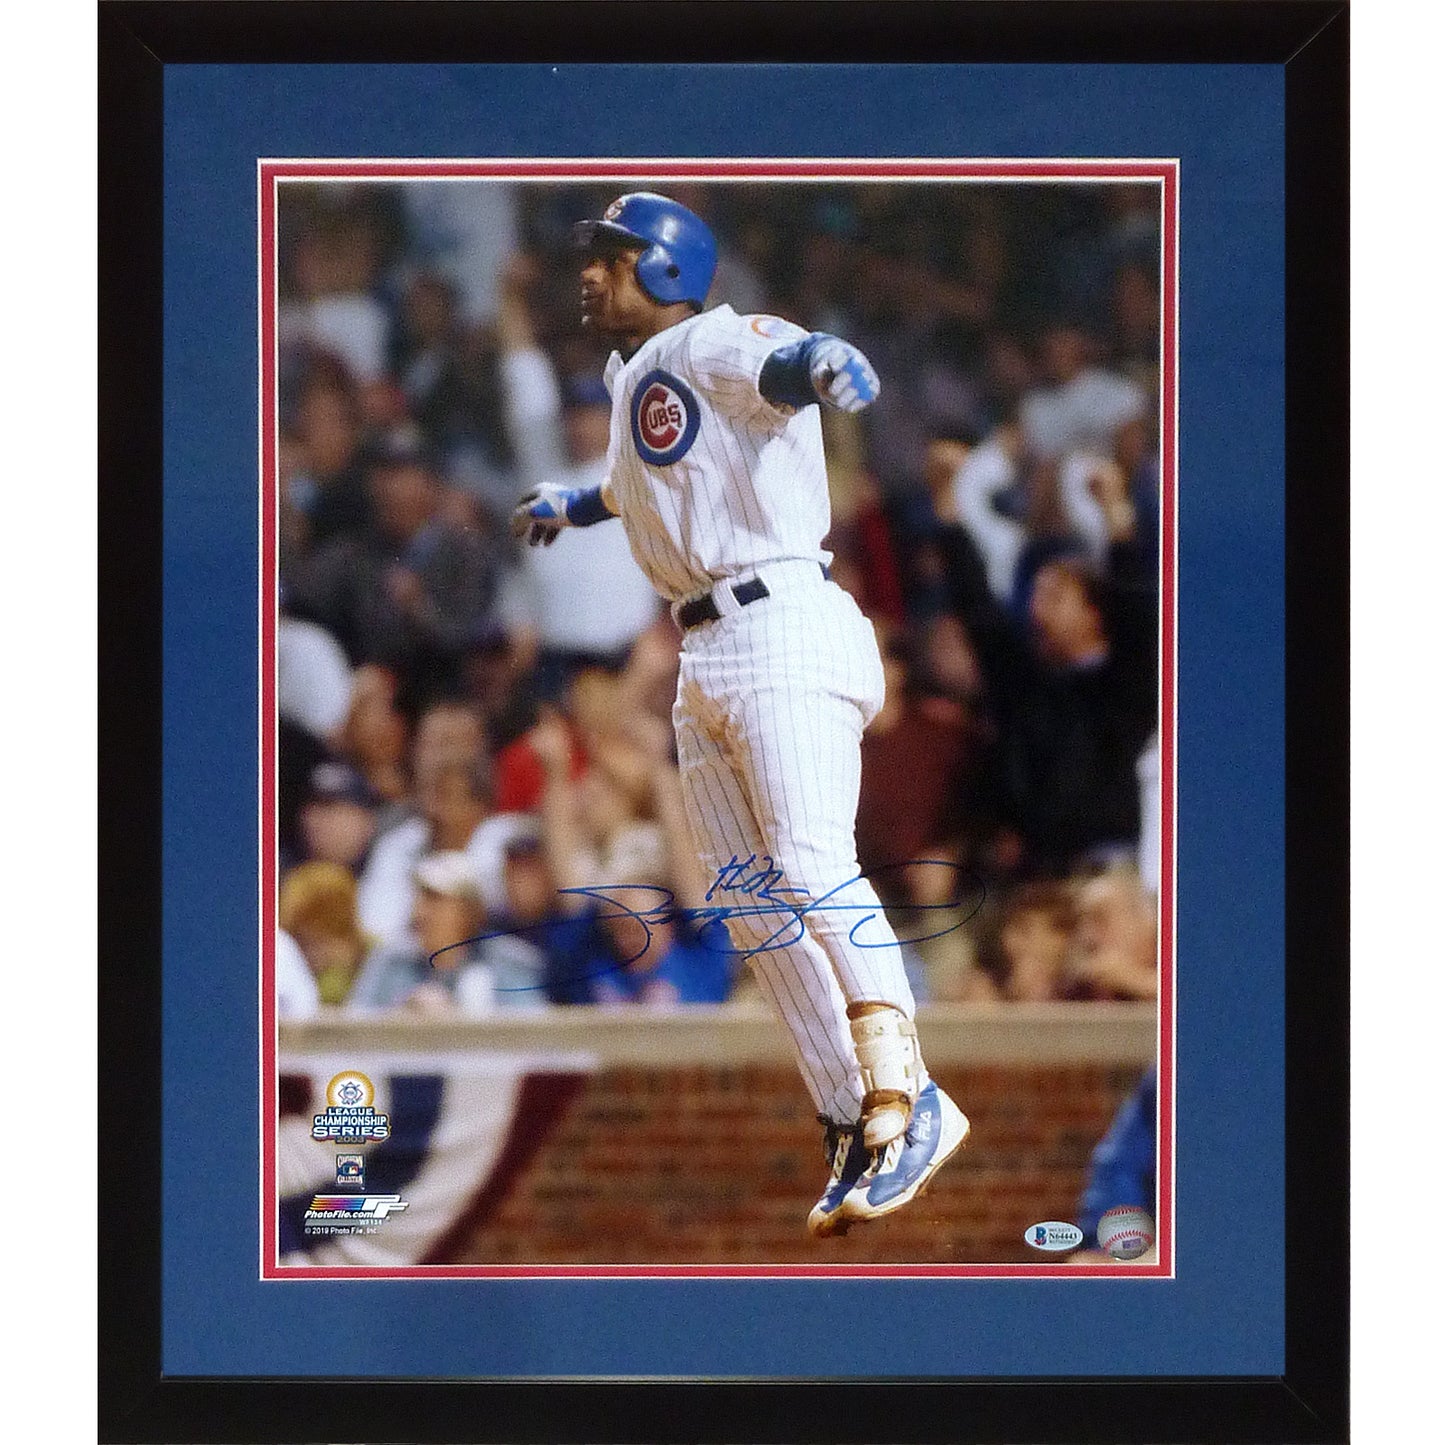 Sammy Sosa Autographed Chicago Cubs Deluxe Framed 16x20 Photo - JSA